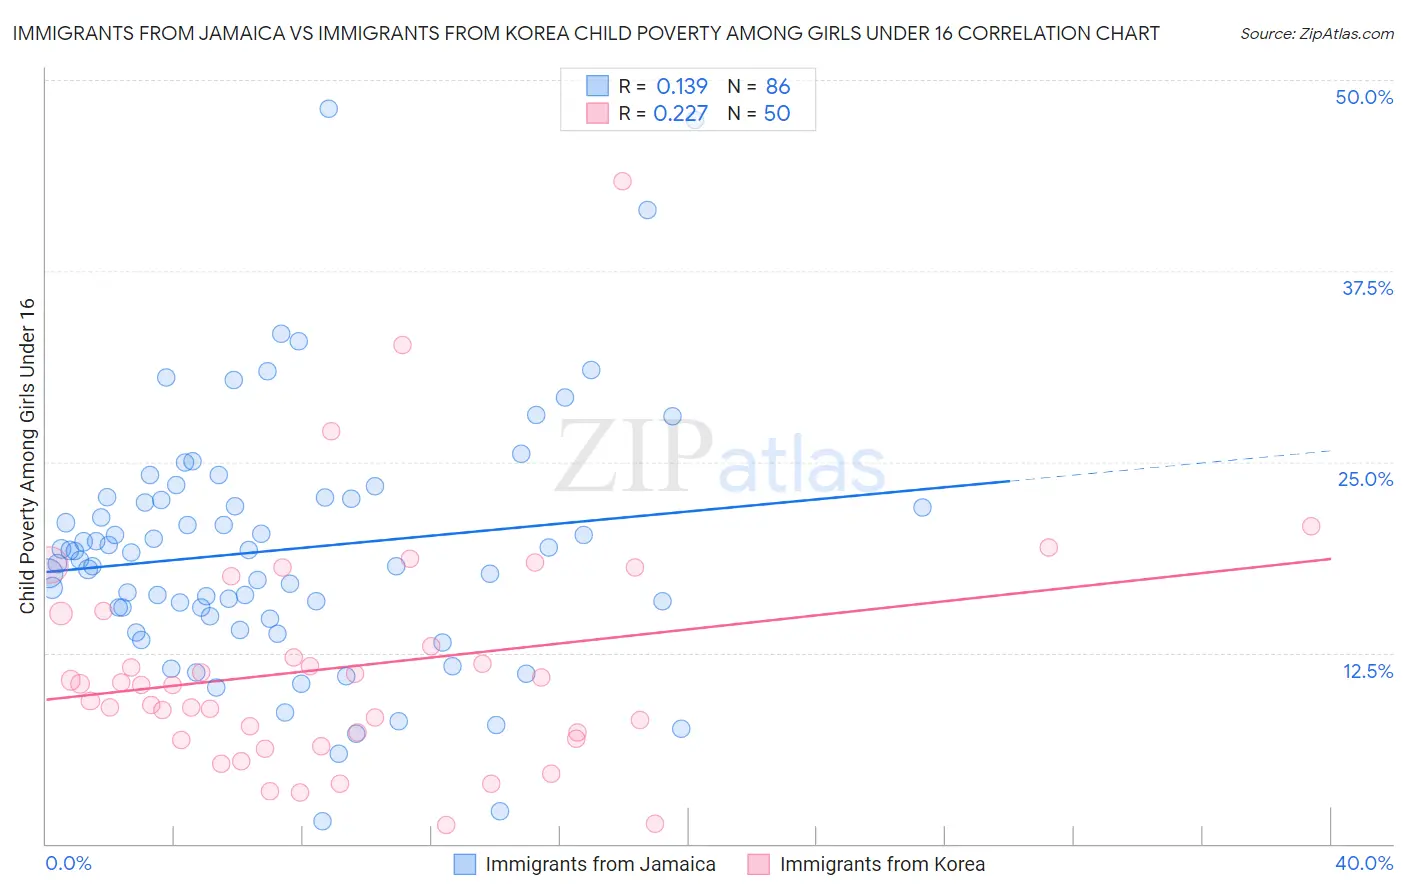 Immigrants from Jamaica vs Immigrants from Korea Child Poverty Among Girls Under 16